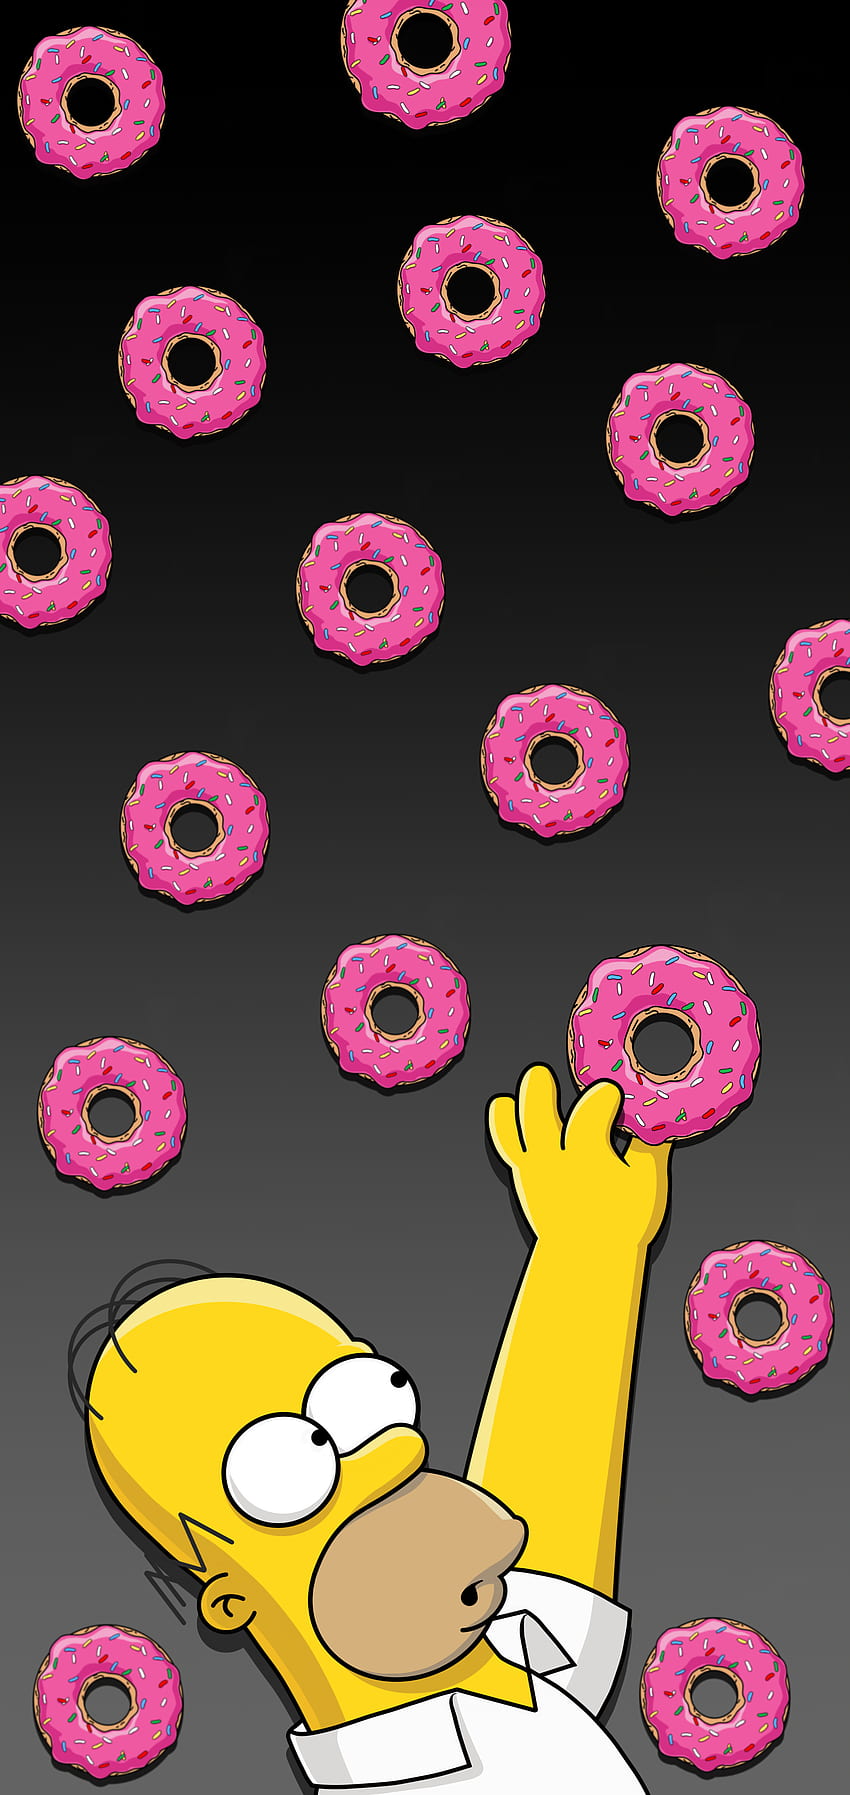 Raining Donuts for Homer Simpson by ranurr Galaxy Note 10 HD phone wallpaper